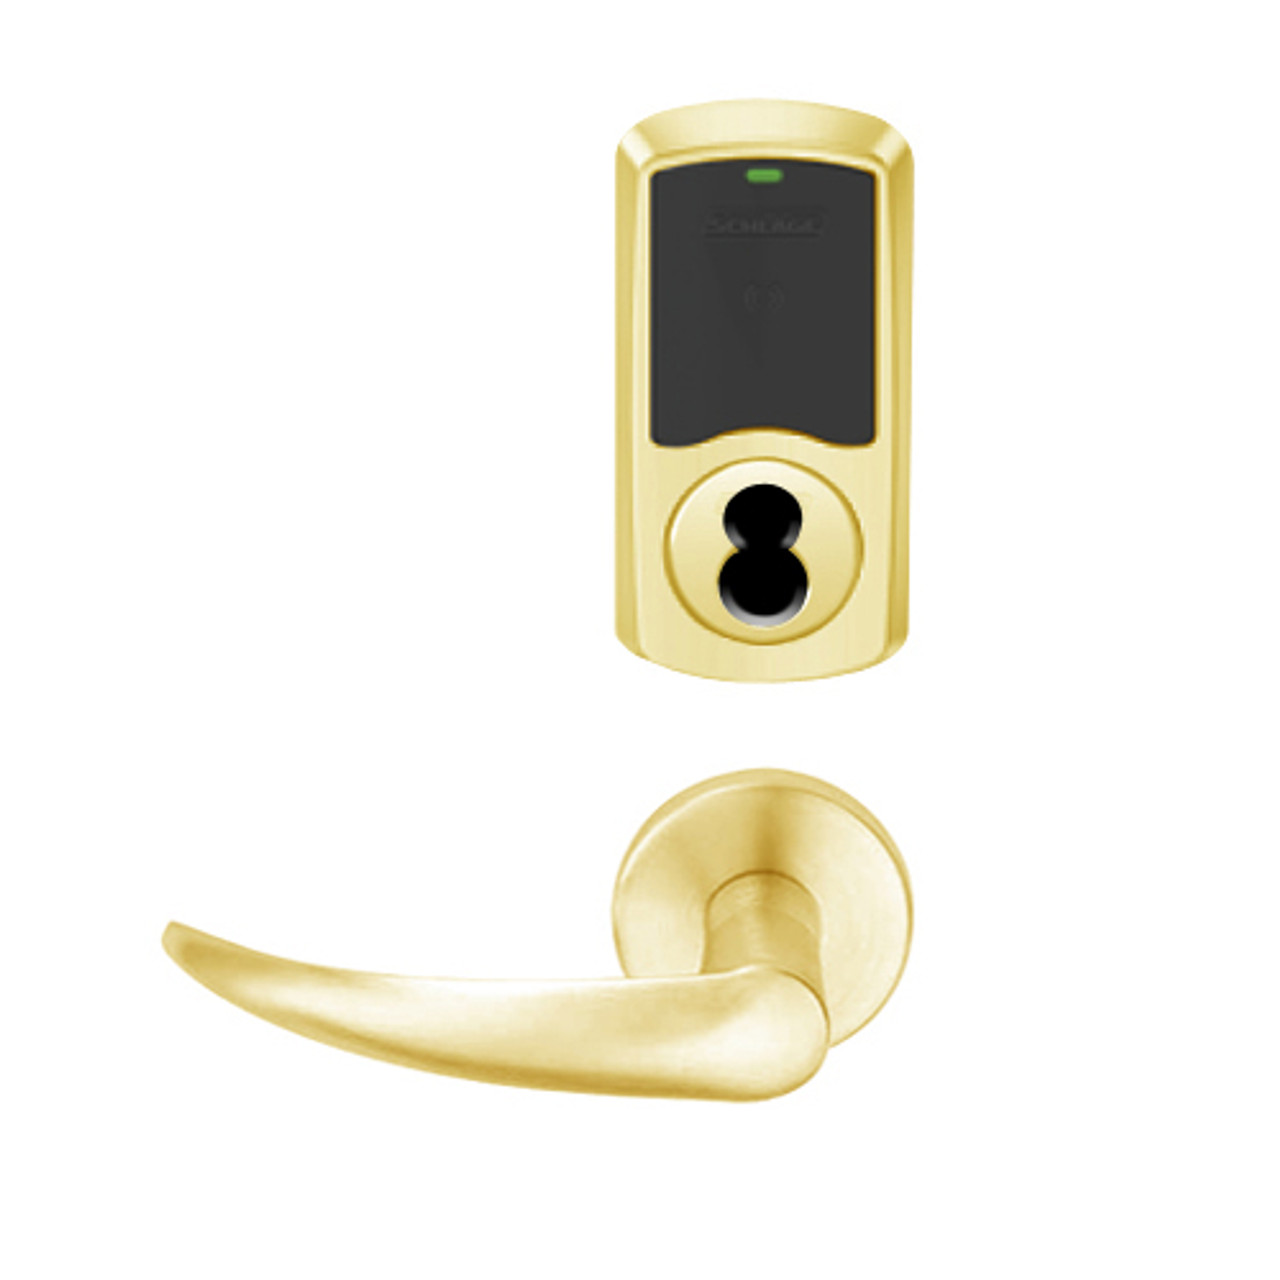 LEMD-GRW-BD-OME-605-00B Schlage Privacy/Apartment Wireless Greenwich Mortise Deadbolt Lock with LED and Omega Lever Prepped for SFIC in Bright Brass